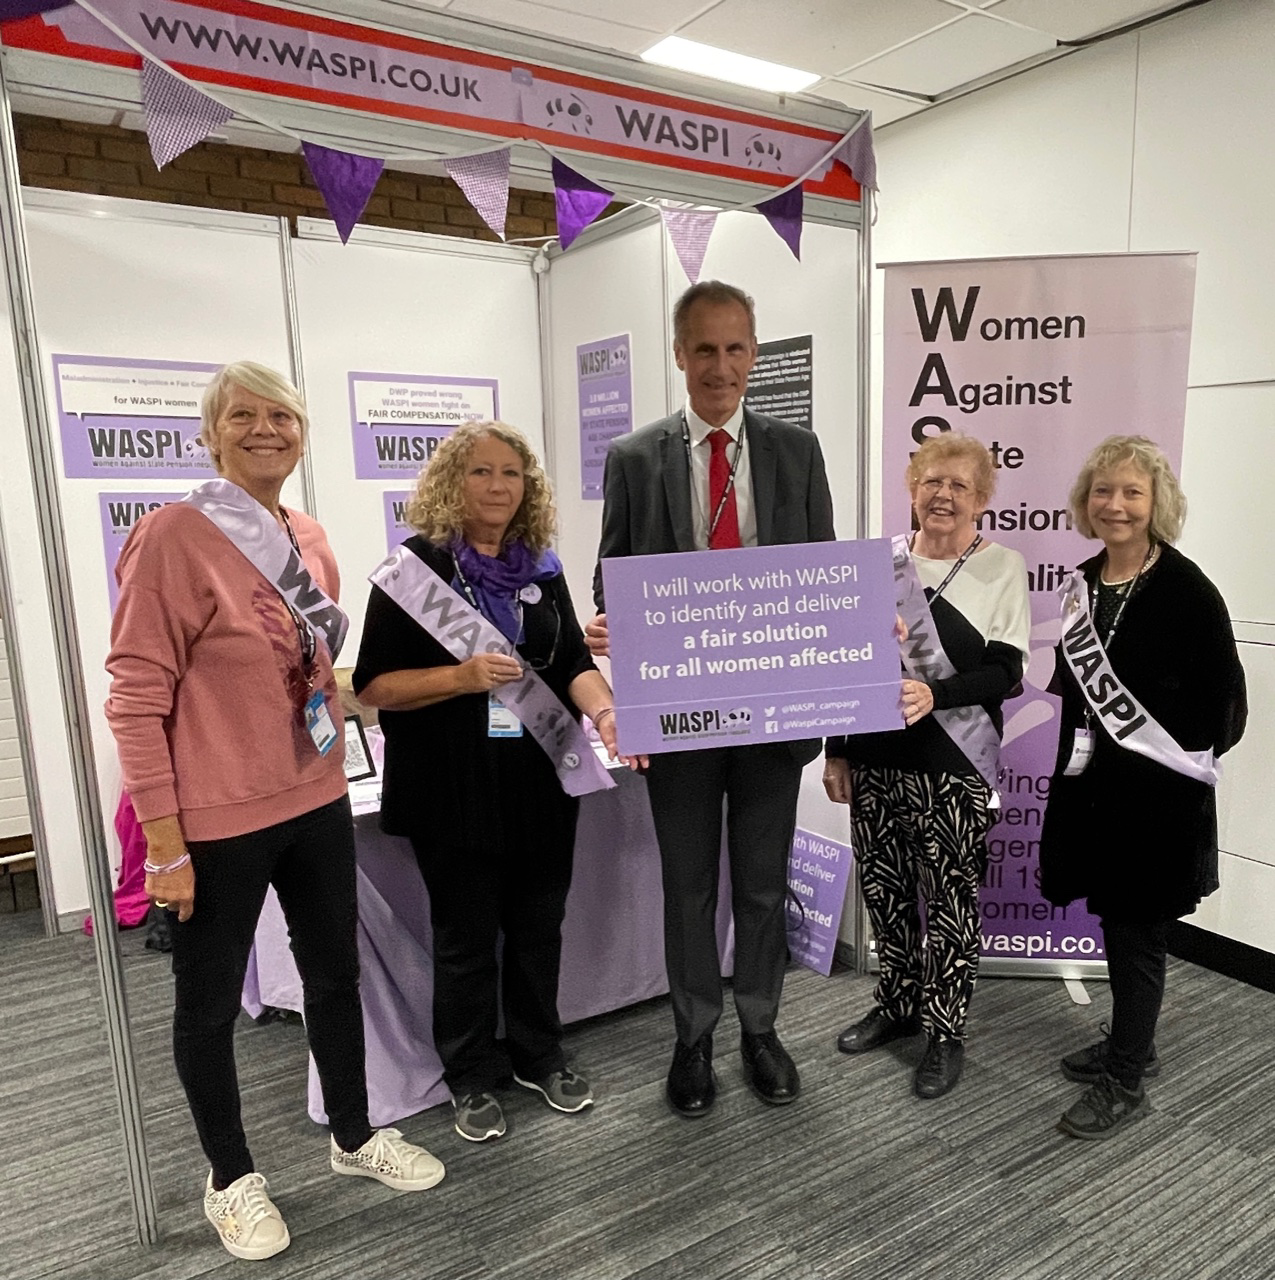 Bill Esterson MP with some of the WASPI campaigners at Labour Party Conference.